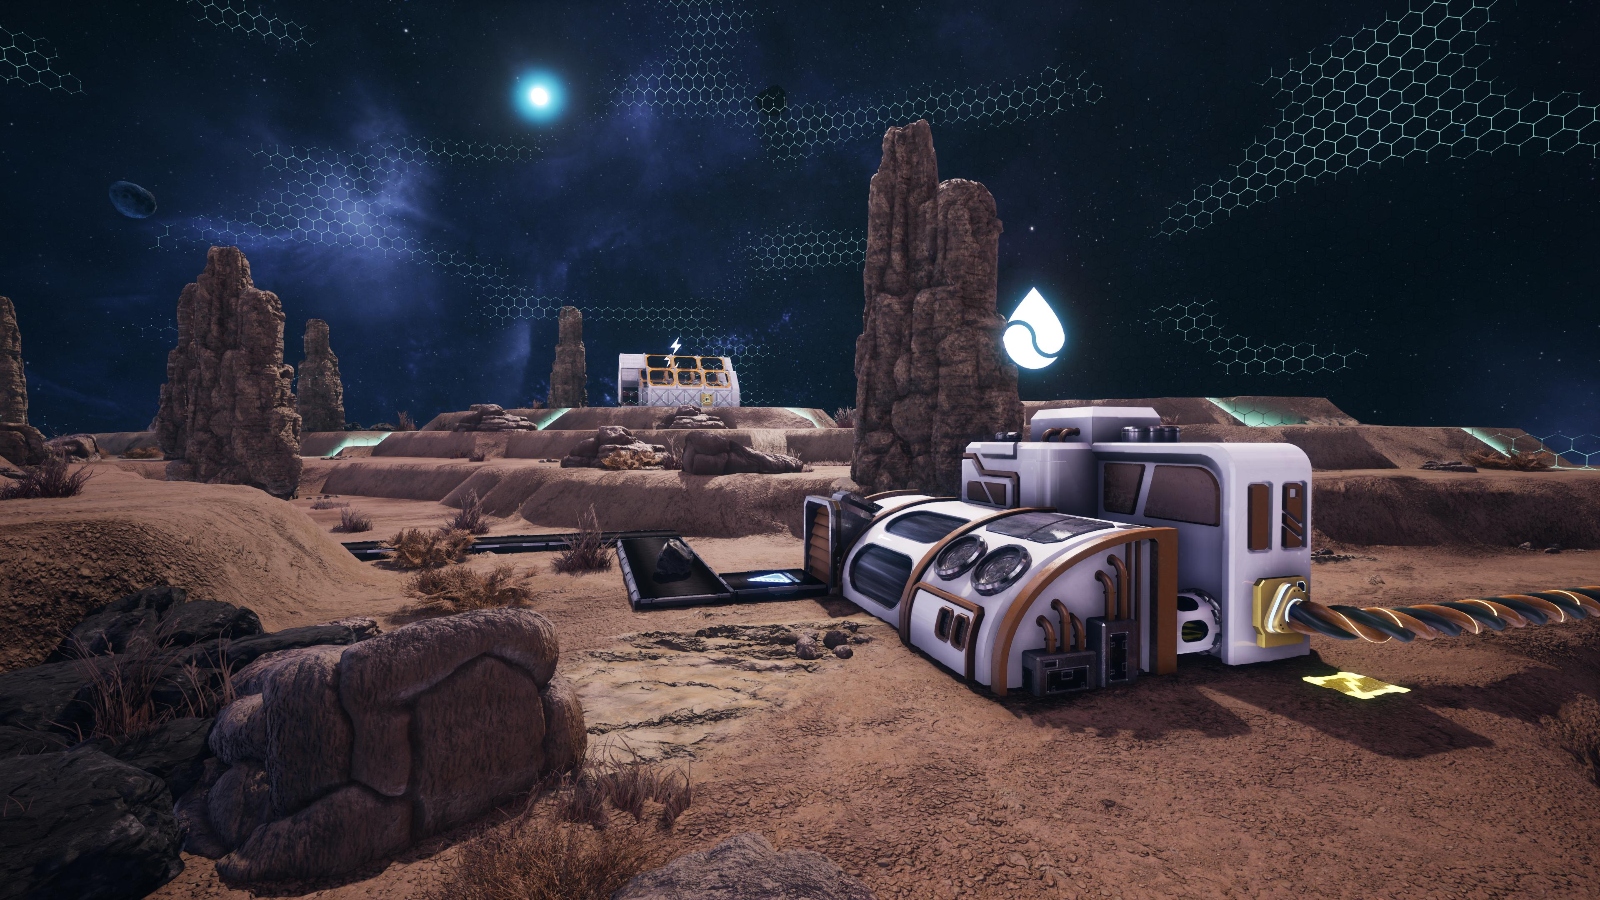 Sci-Fi Sandbox Construction Game Astro Colony To Launch in 2022